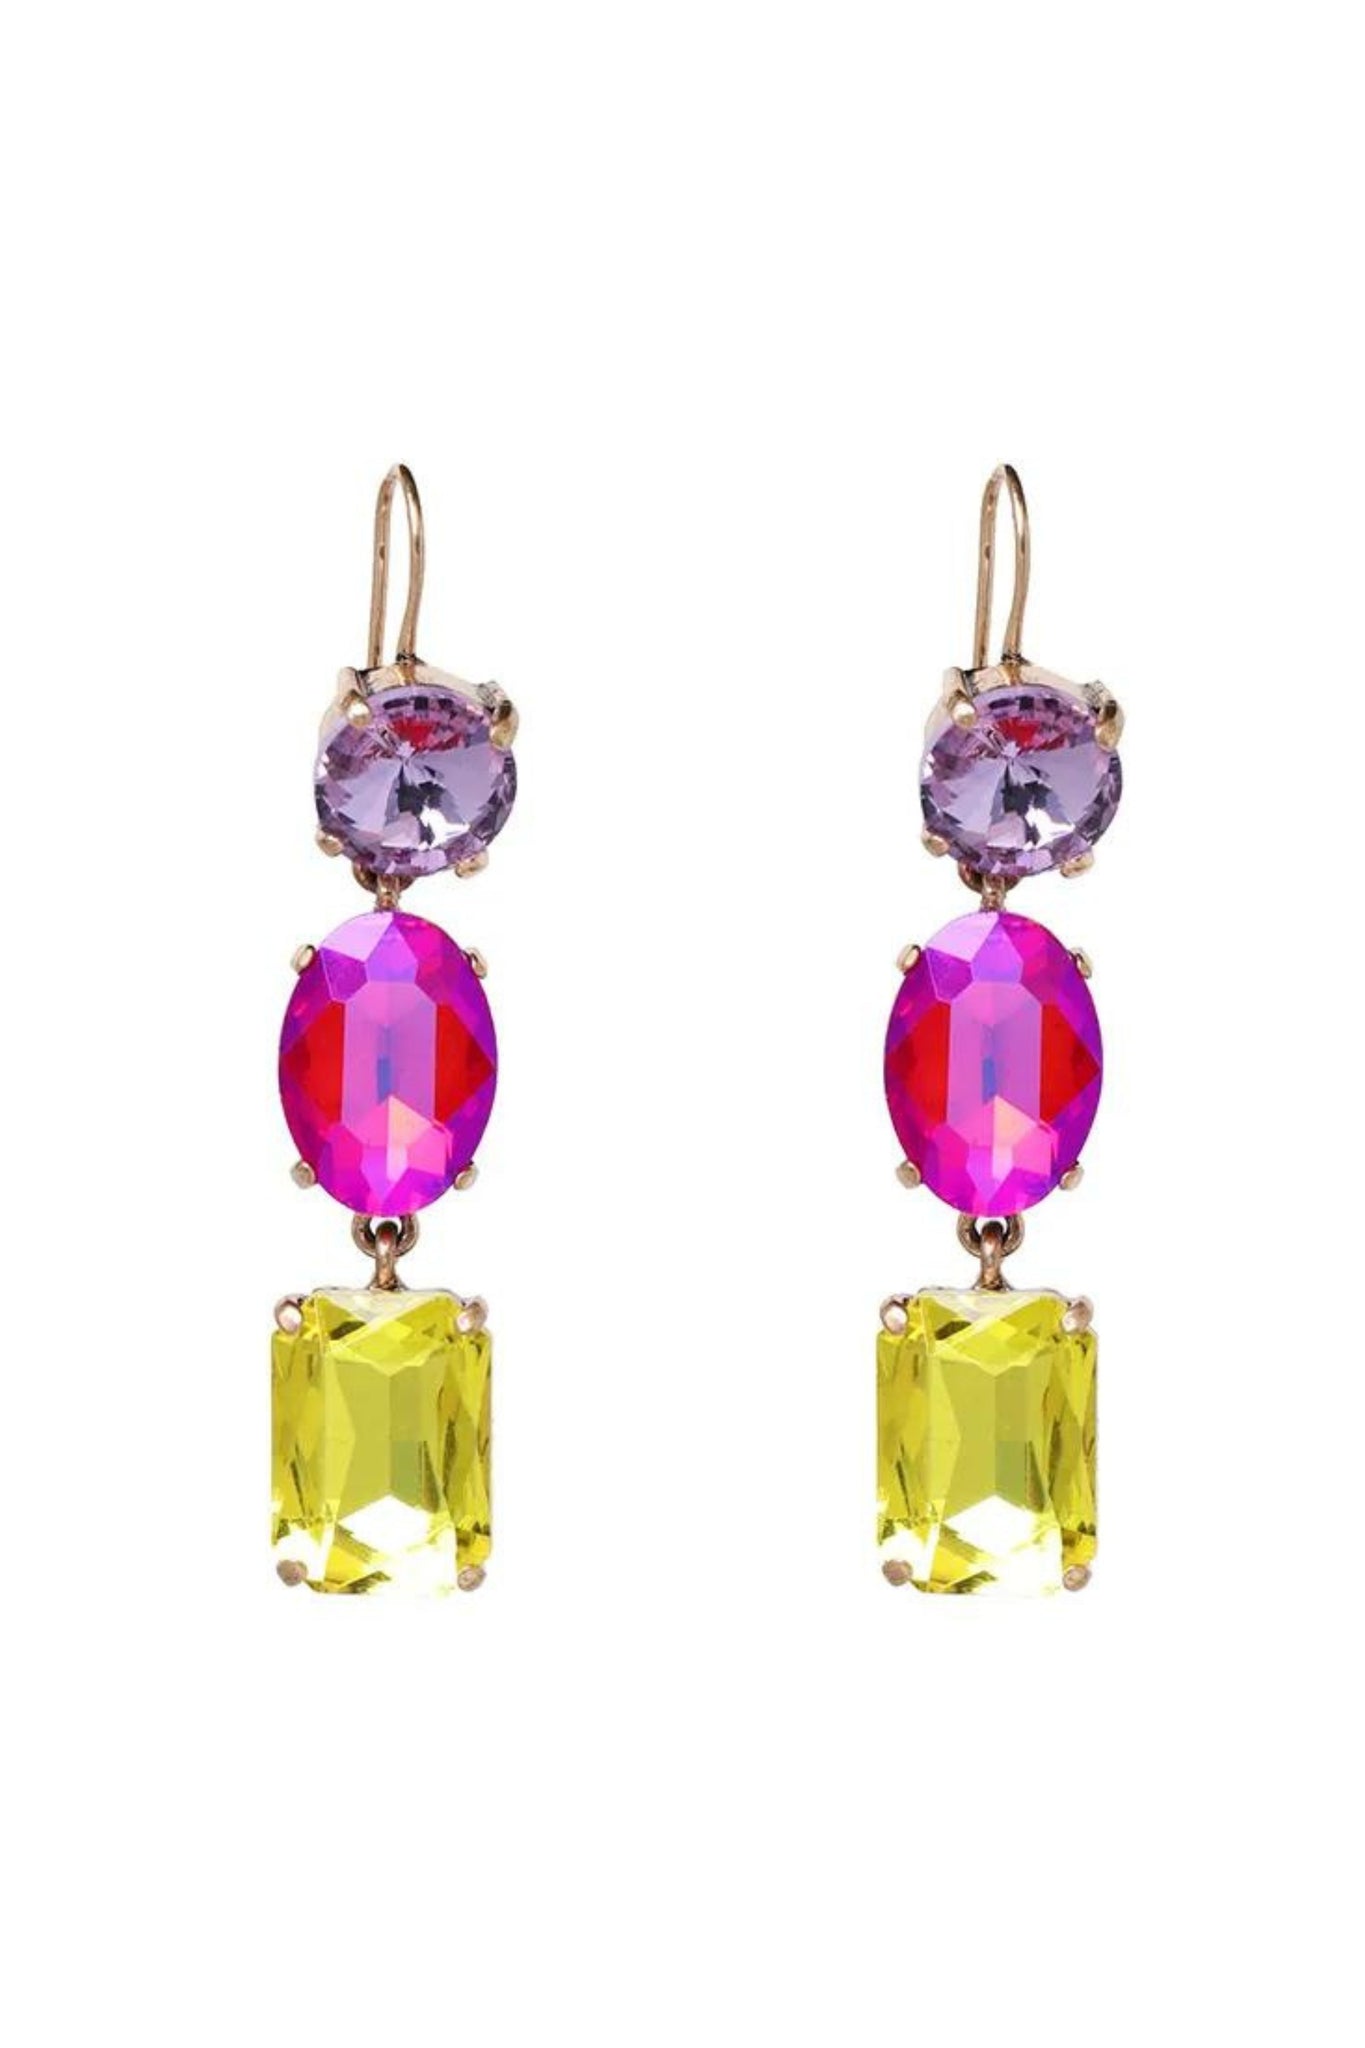 Polly Crystal Hook Drop Earrings - Lilac Pink Chartreuse